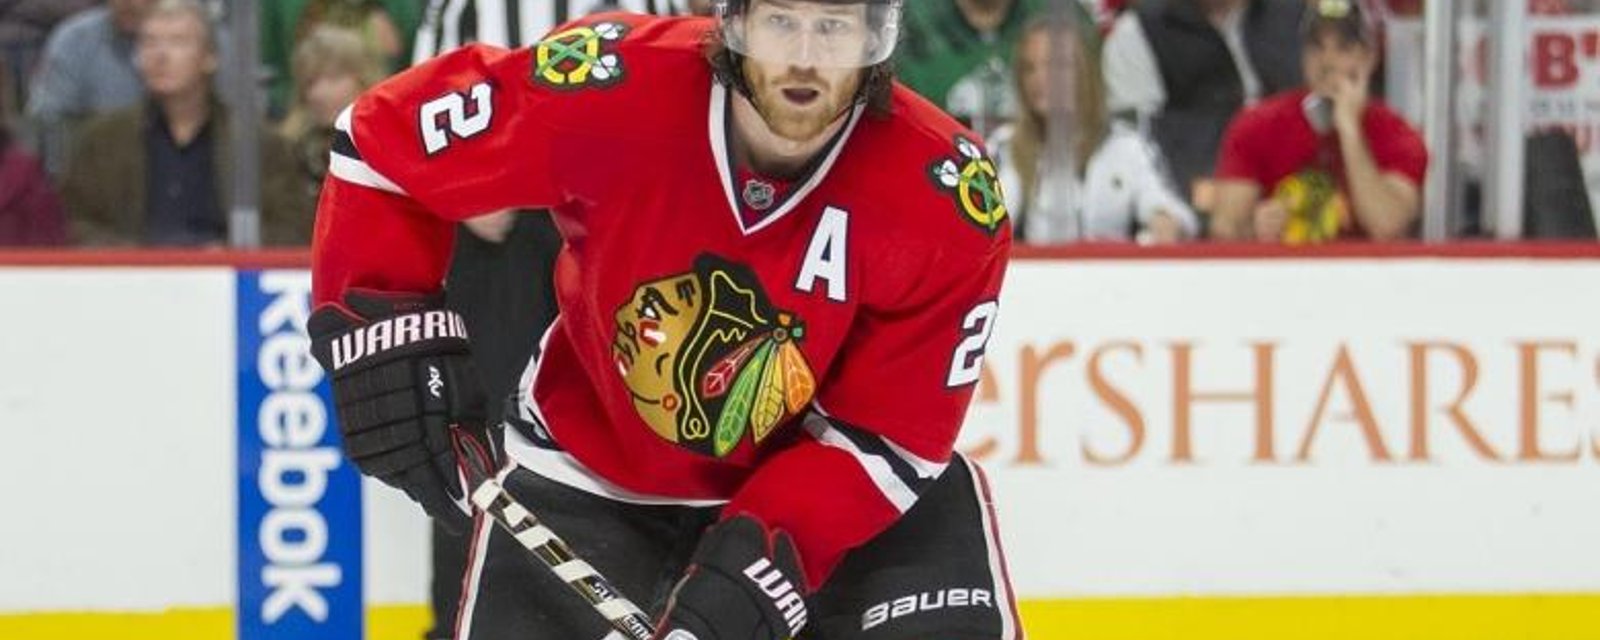 New video evidence could impact the Duncan Keith suspension.